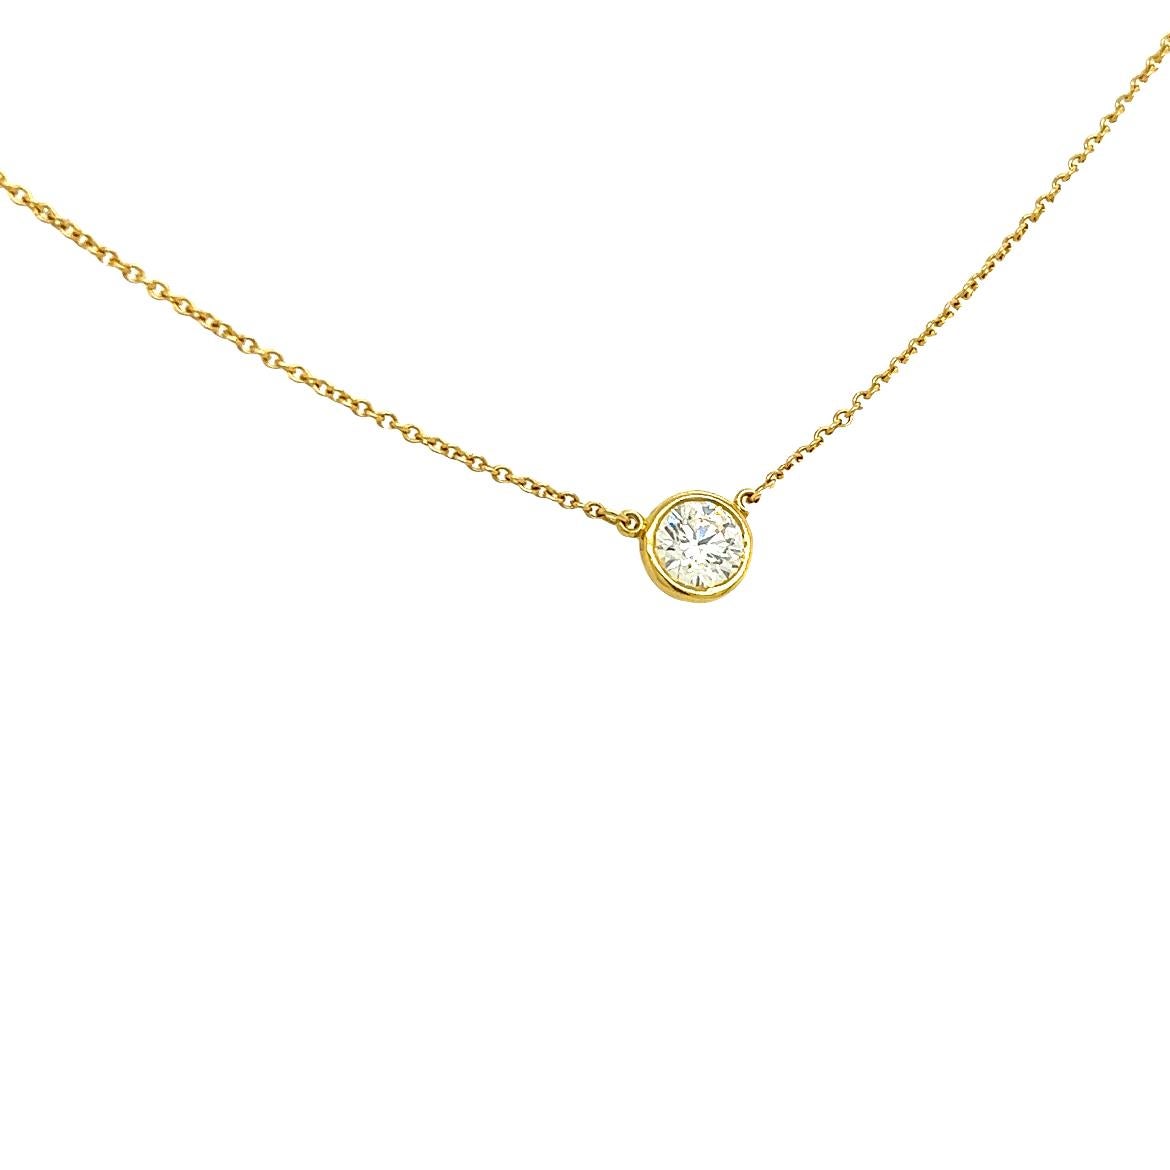 A single hand-polished diamond shines at the center of this delicate and refined 18k yellow gold pendant. Elsa Peretti’s revolutionary Diamonds by the Yard collection features a combination of fine, fluid chains and bezel-set stones that forever